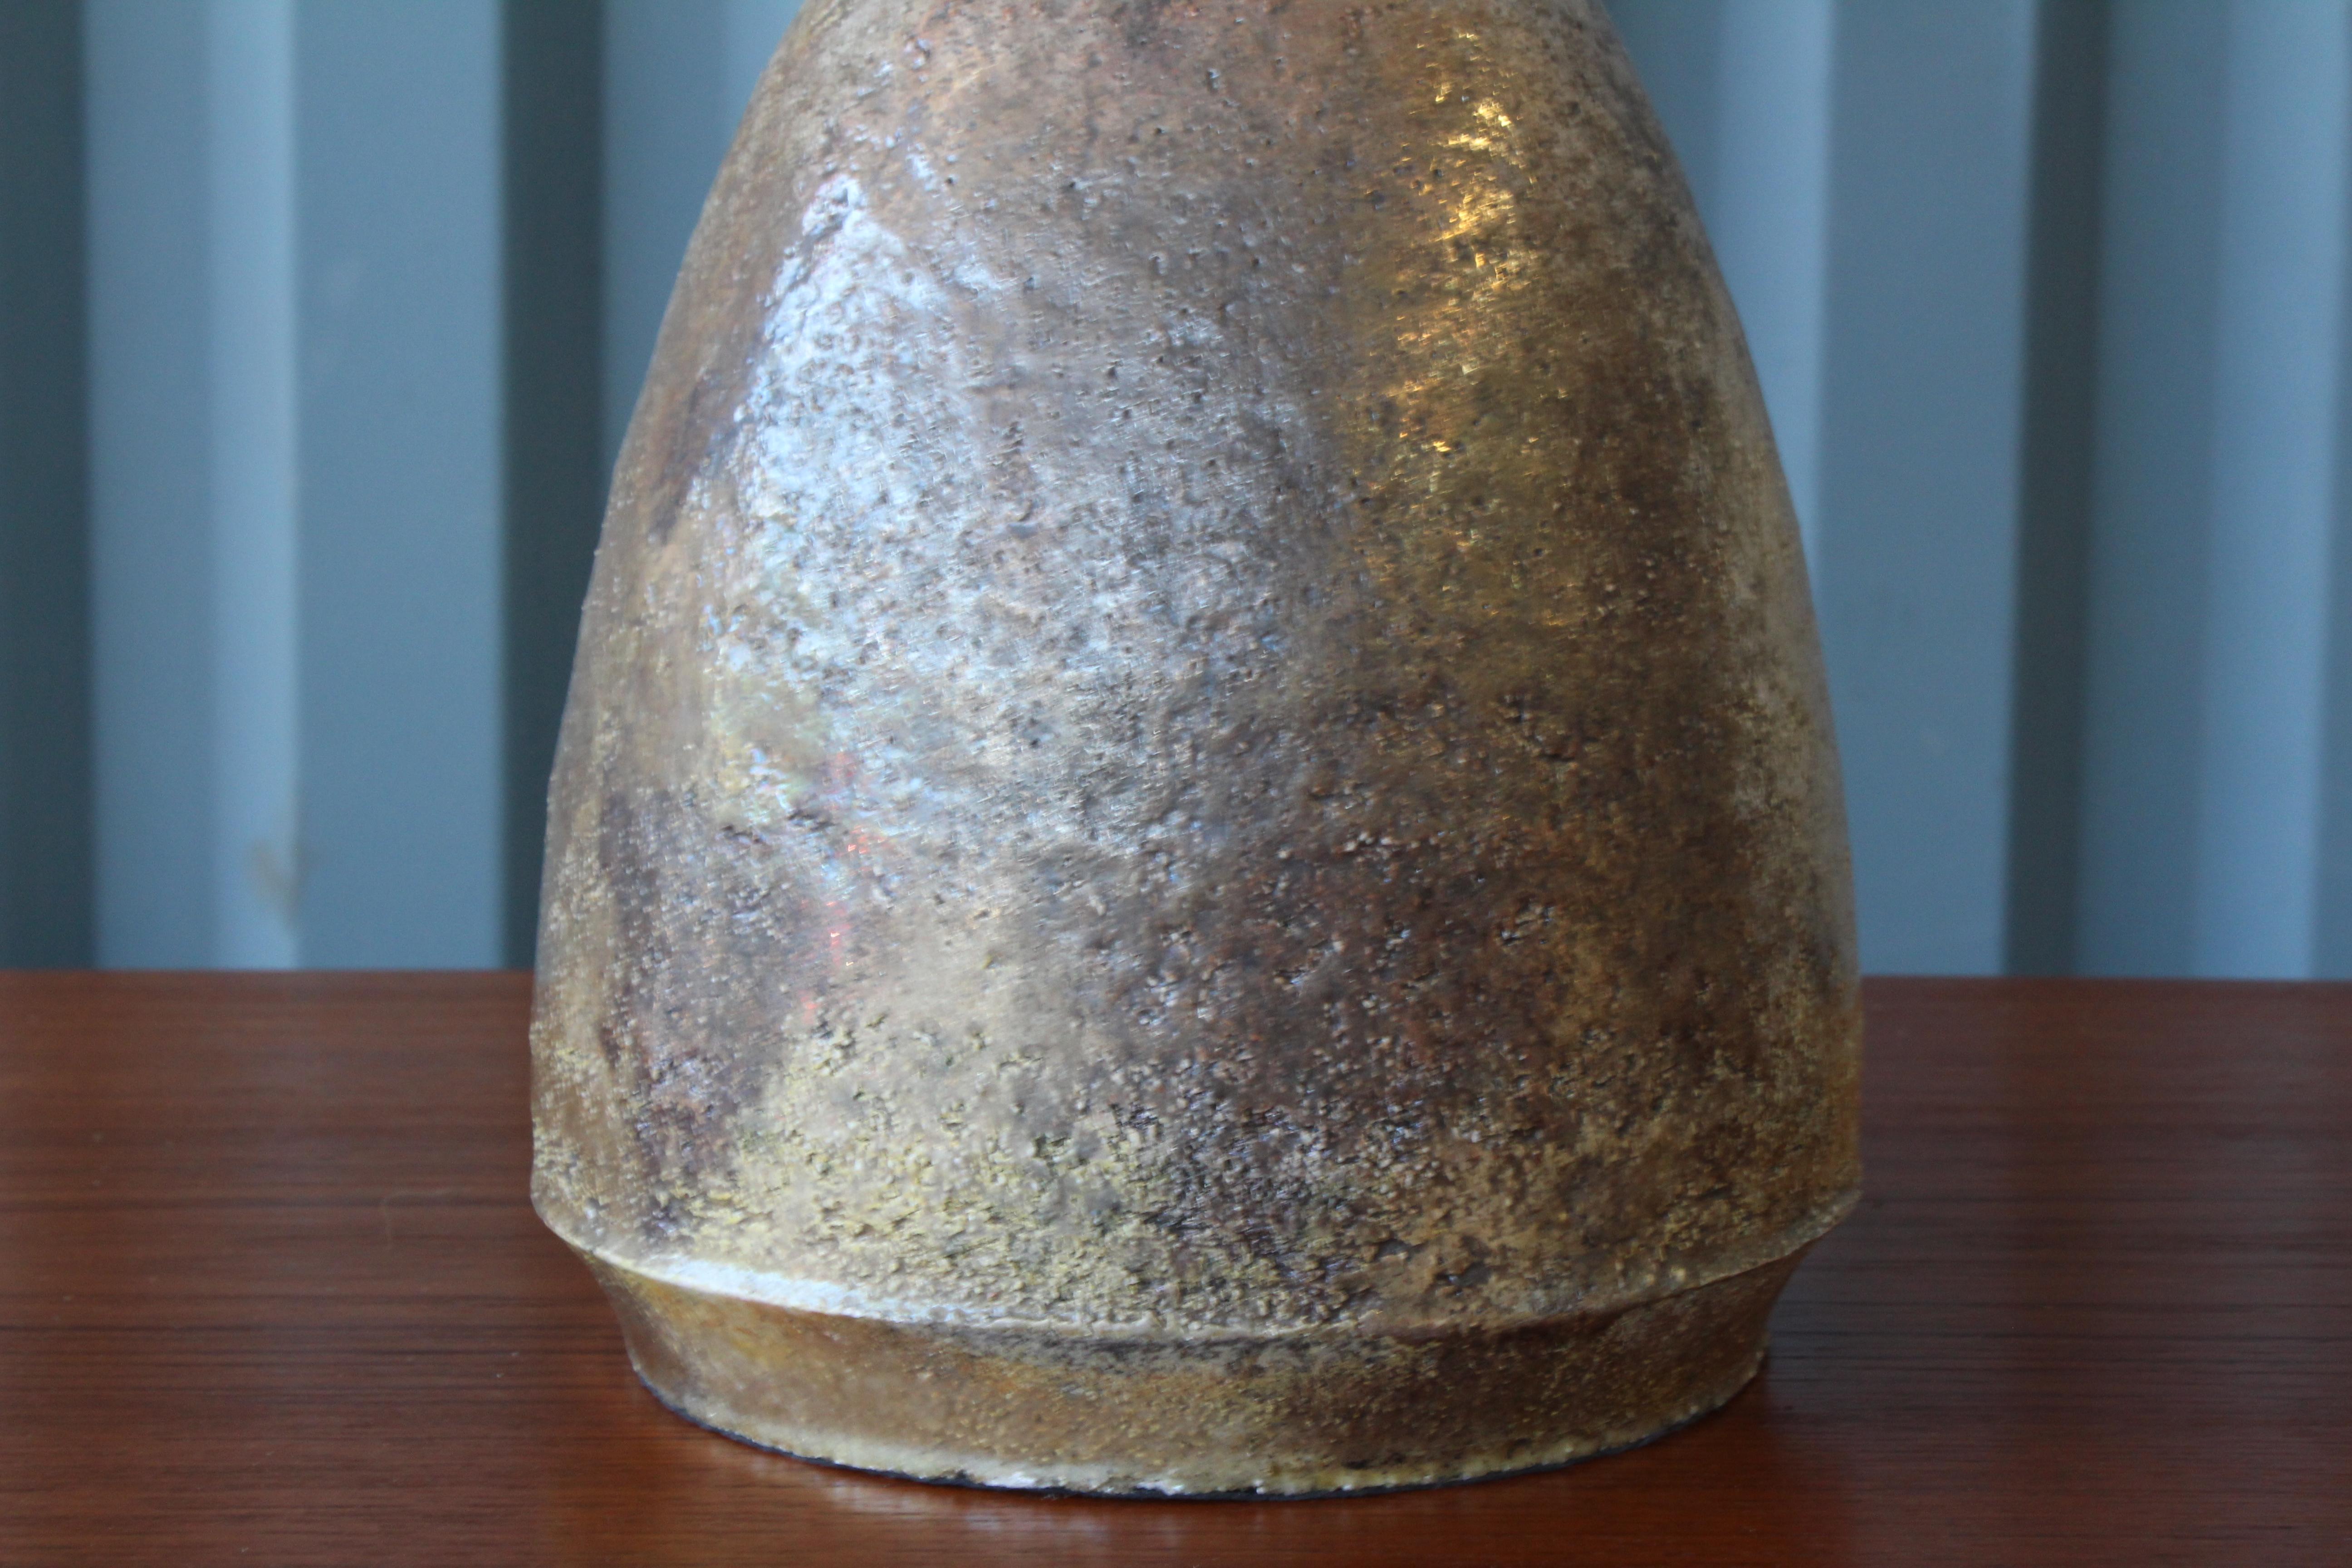 1960s French ceramic table lamp in a brown metallic glaze. Newly rewired and fitted with a custom linen shade.